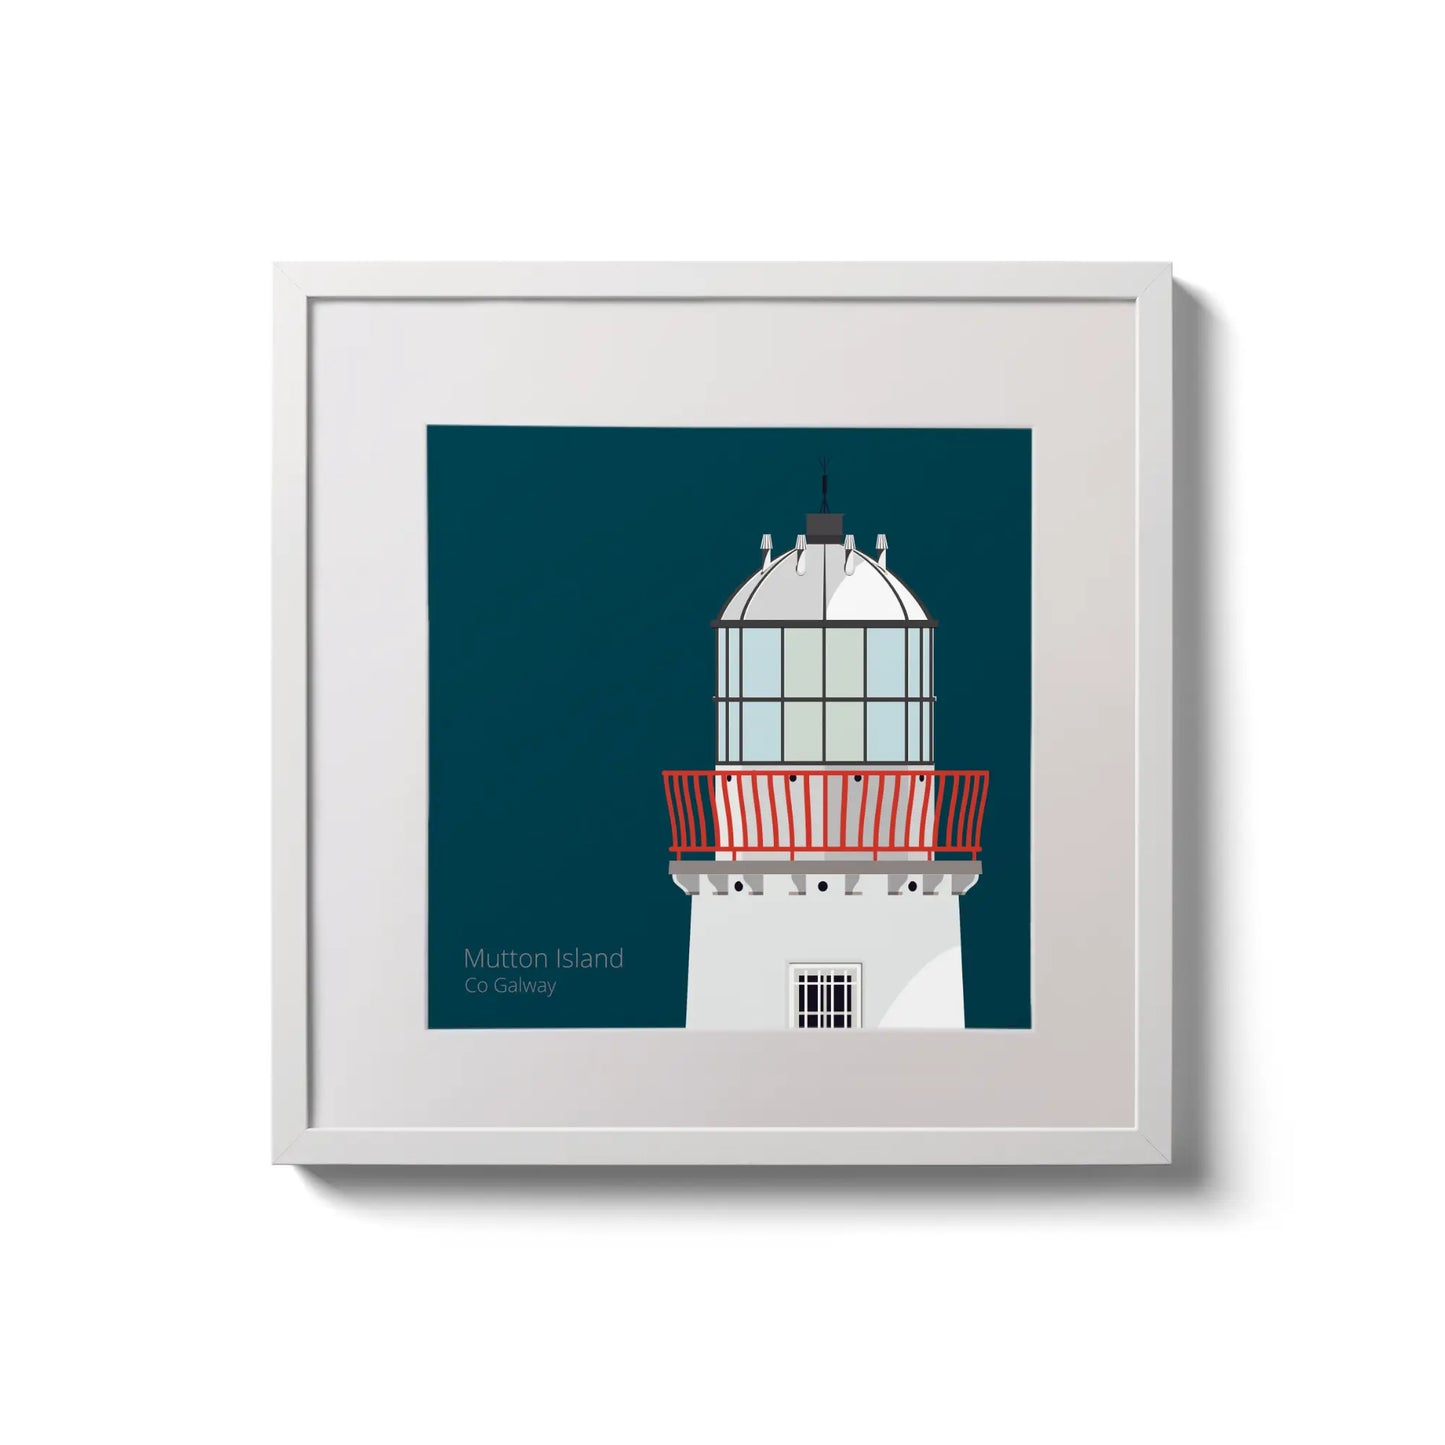 Illustration of Mutton Island lighthouse on a midnight blue background,  in a white square frame measuring 20x20cm.